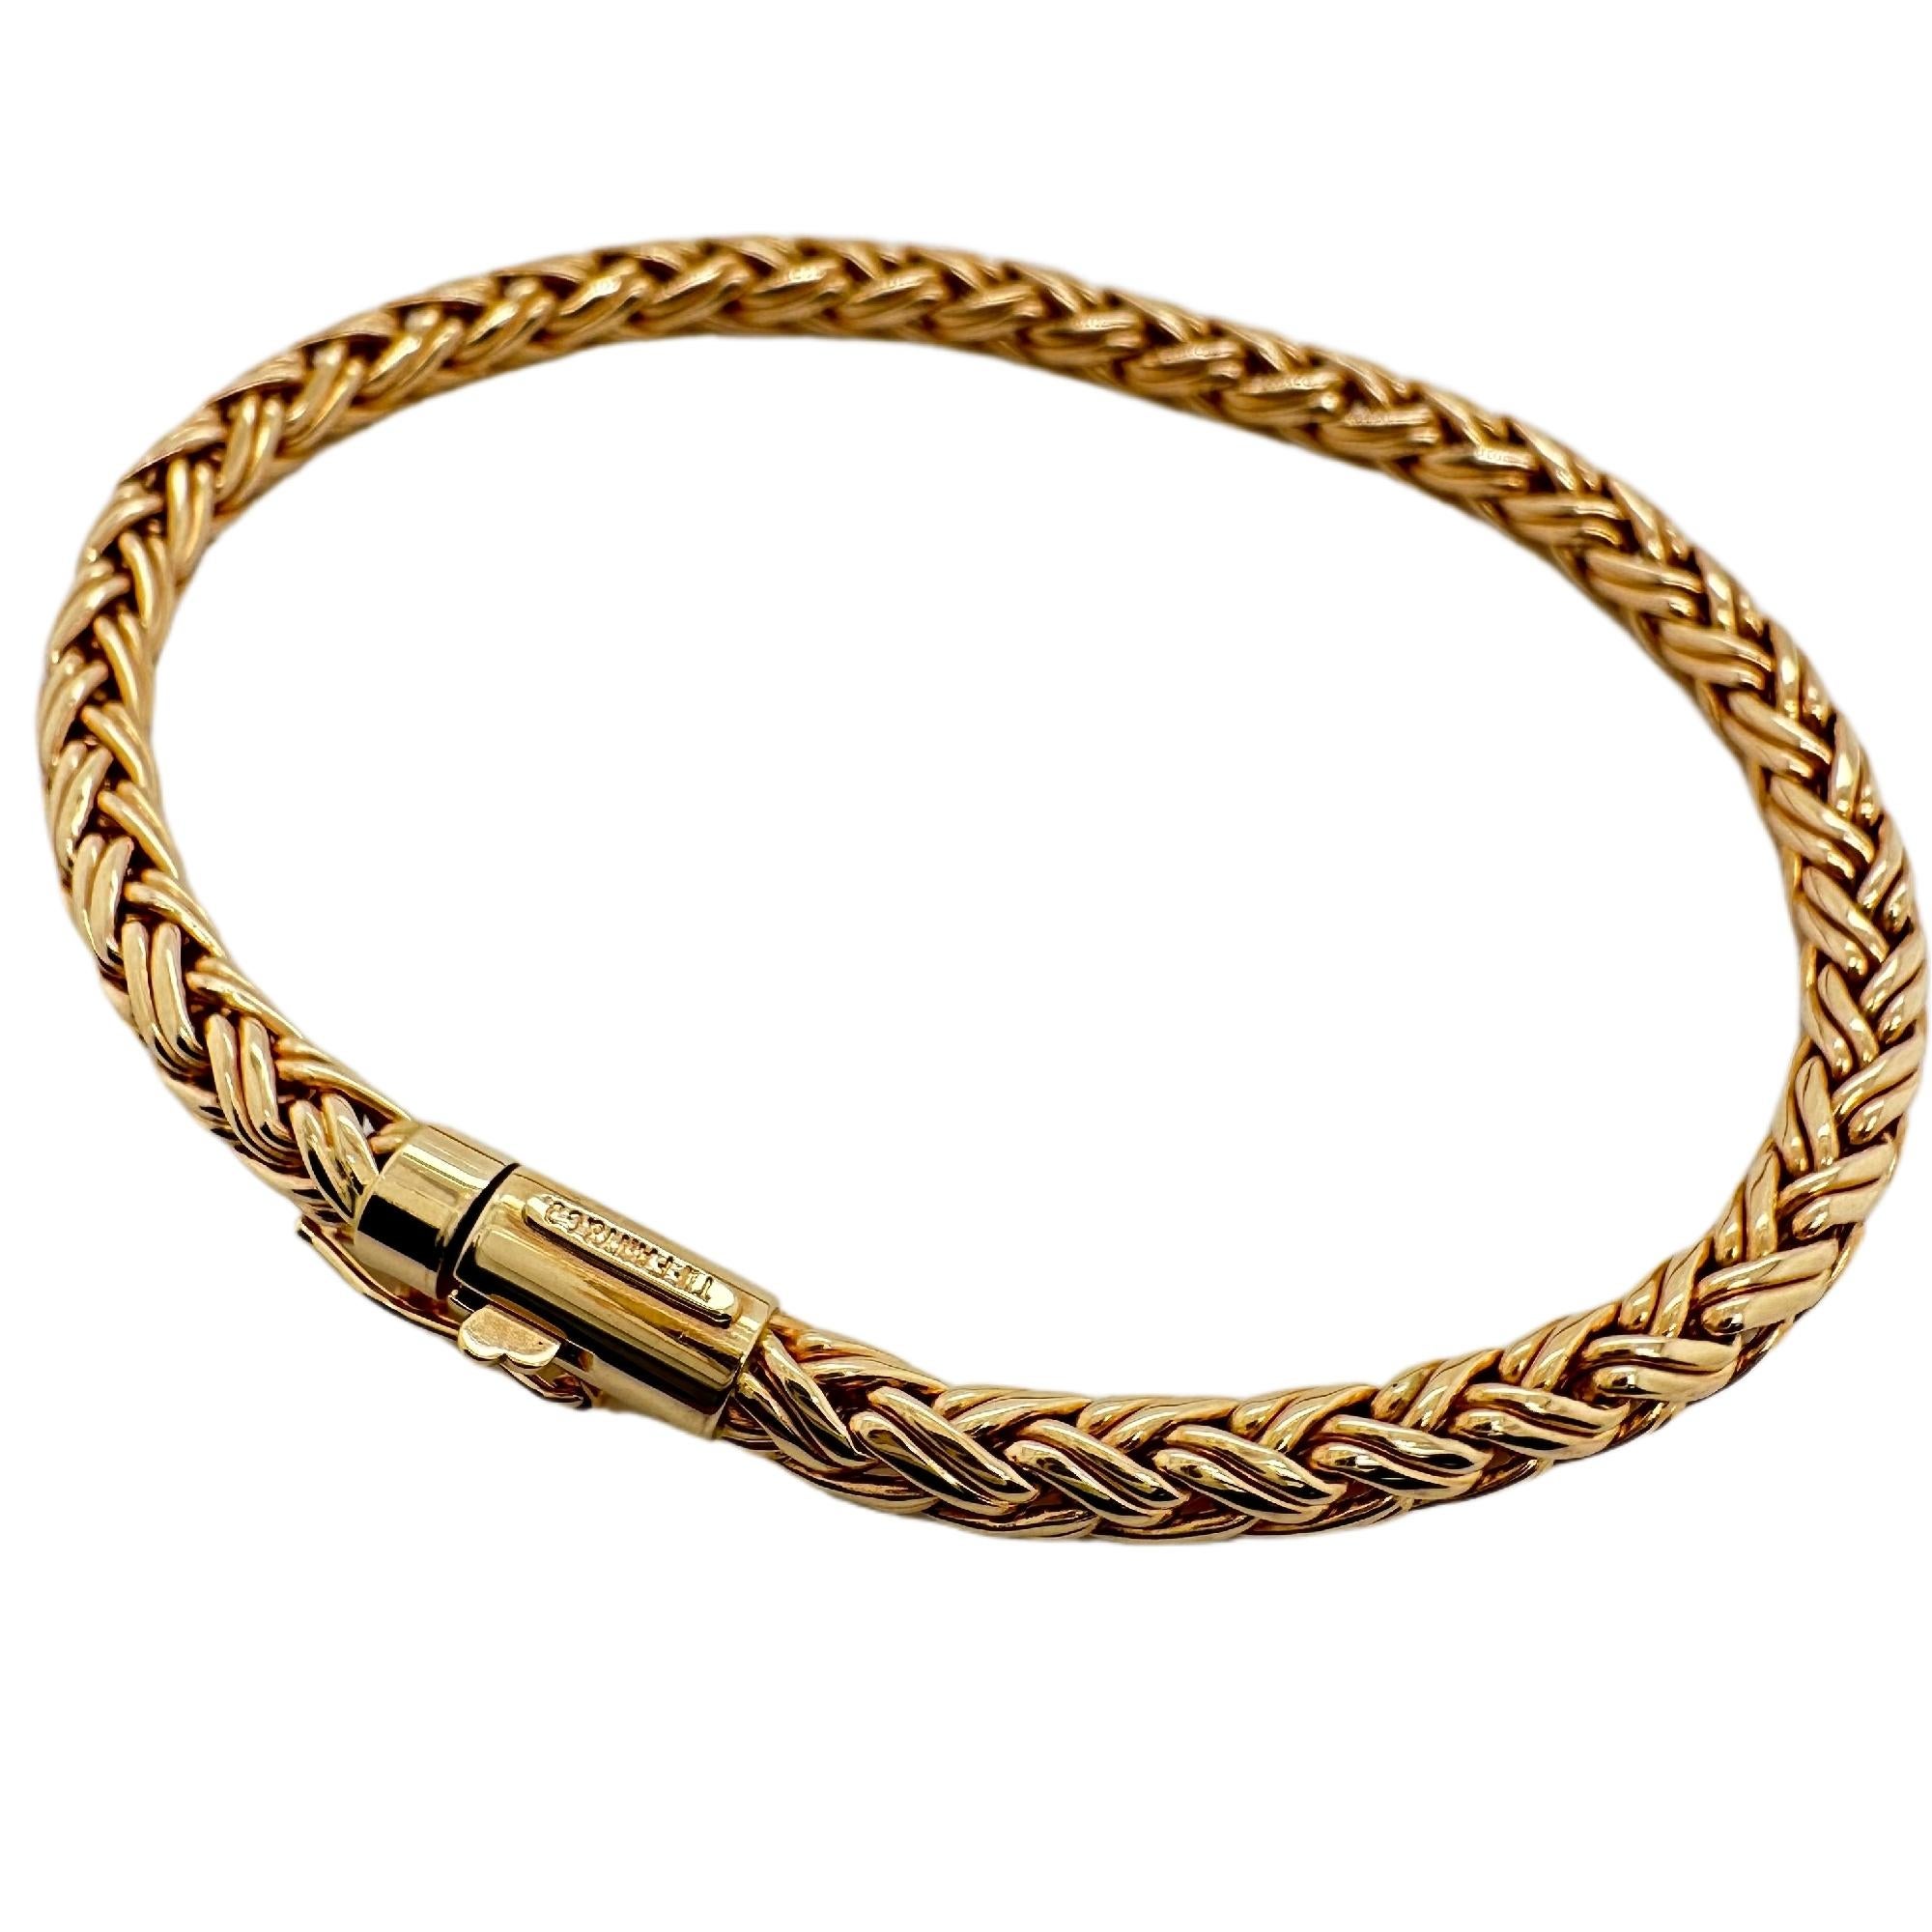 Tiffany & Co. Wheat Braided Rope Bracelet in 14k Yellow Gold In Excellent Condition For Sale In San Diego, CA